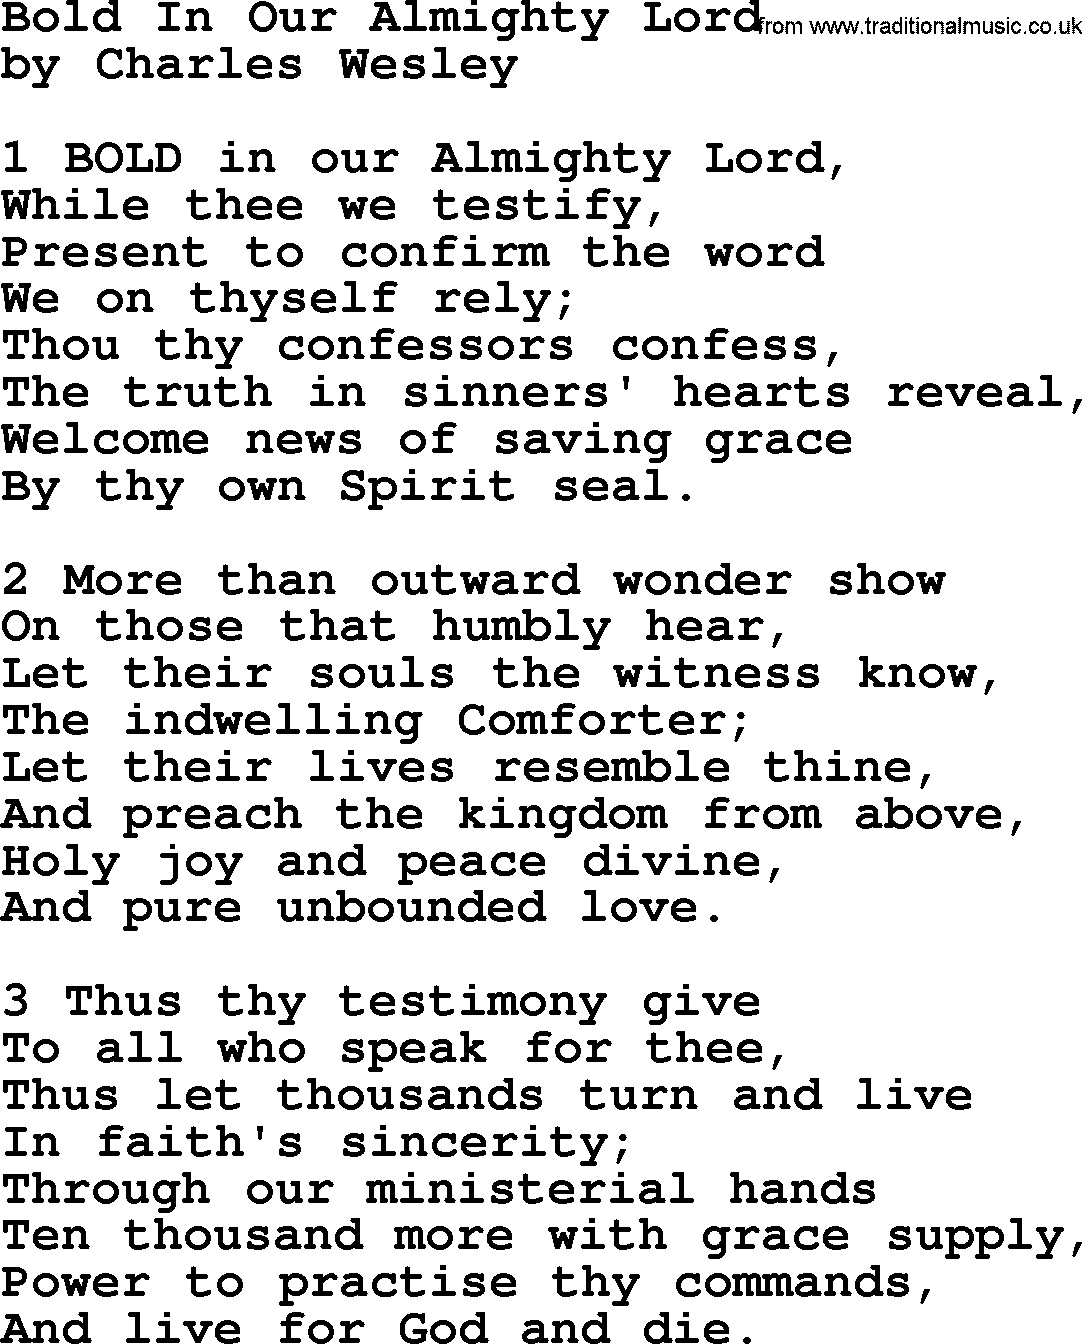 Charles Wesley hymn: Bold In Our Almighty Lord, lyrics